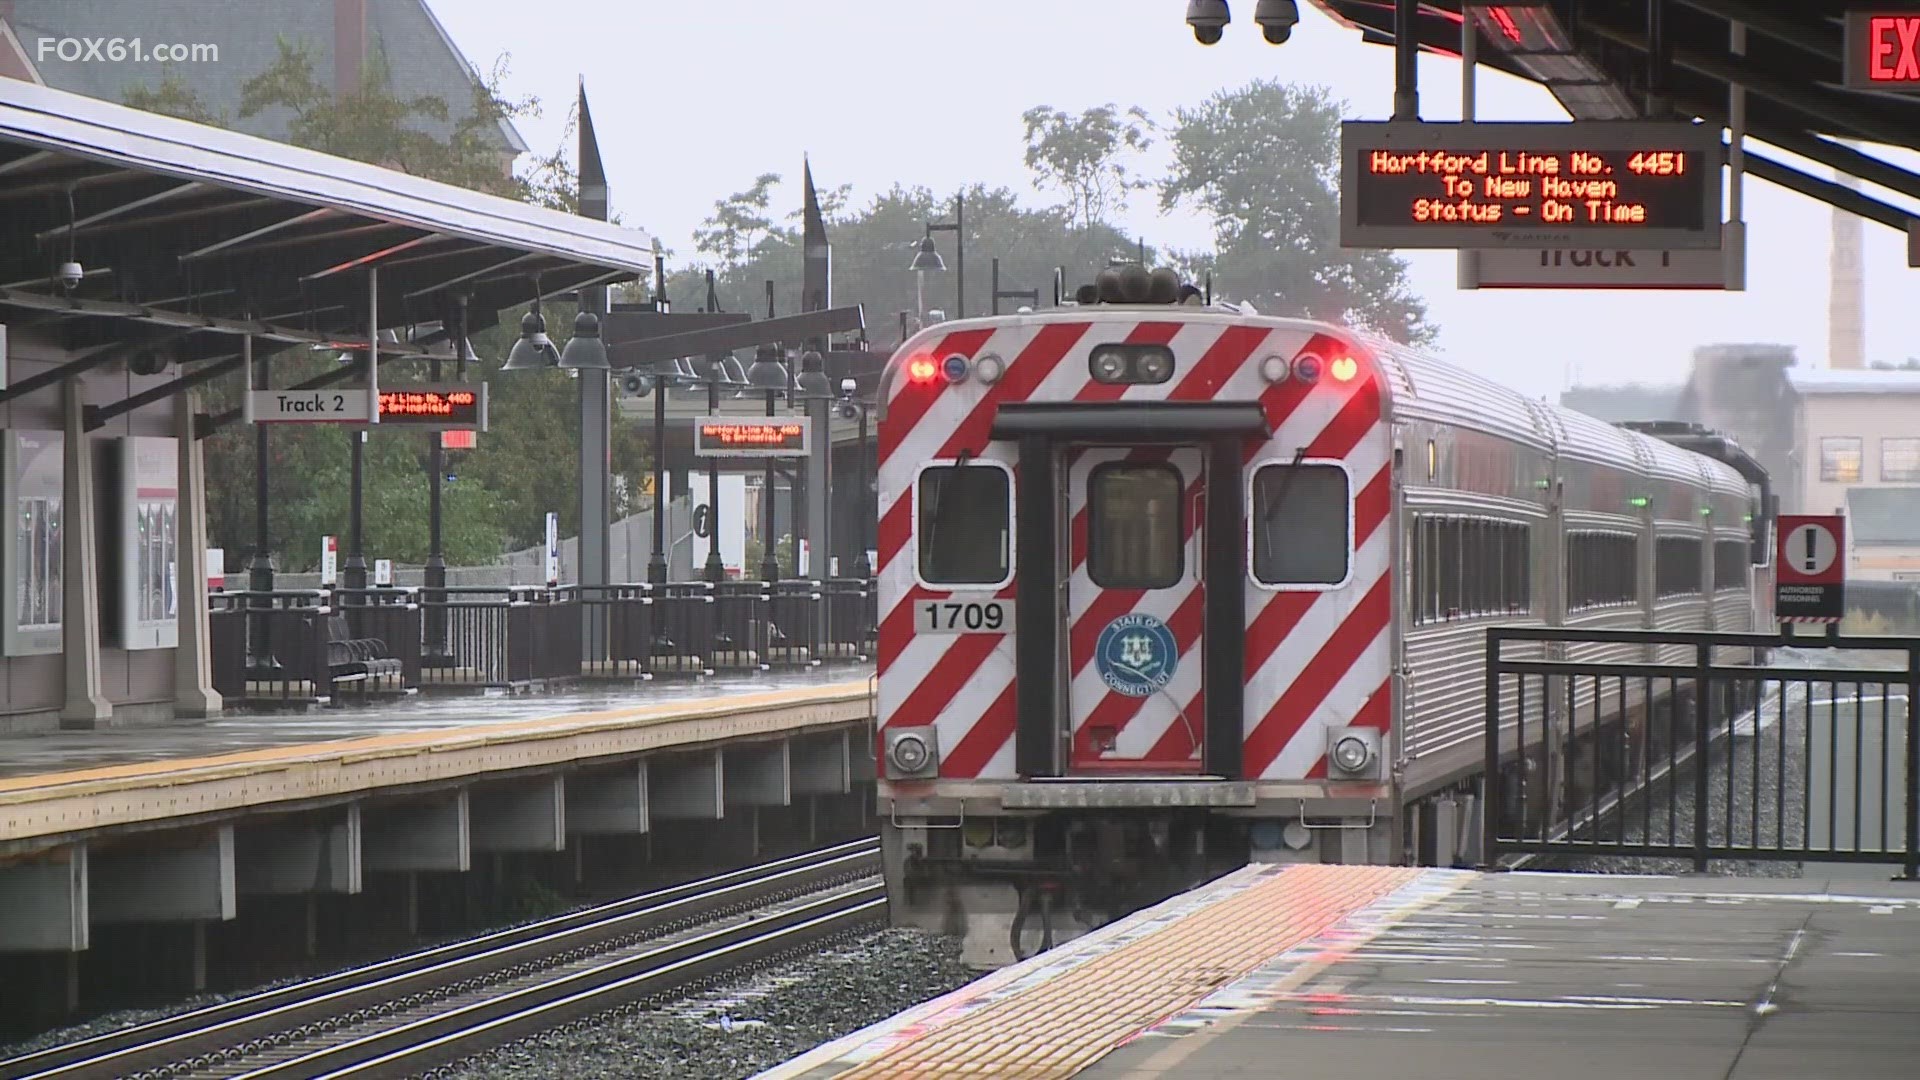 Monday kicks off a week of life-saving initiatives for practicing train rail safety. The Connecticut Department of Transportation is hosting its Rail Safety Week.